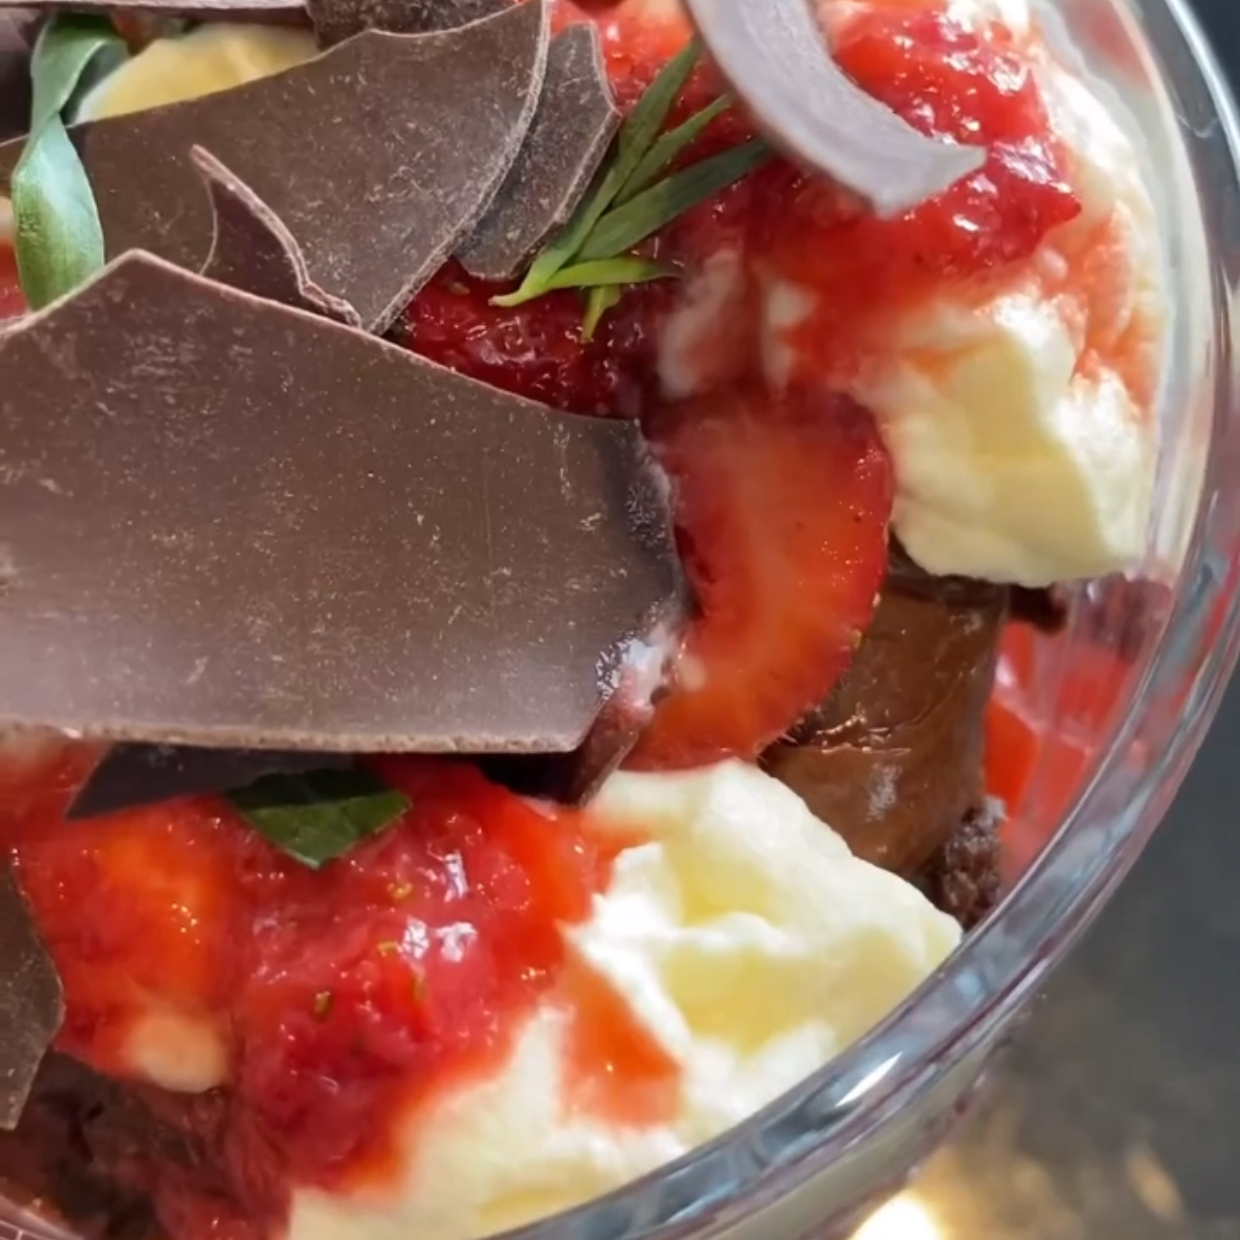 Chocolate and strawberry trifle with tarragon and olive oil